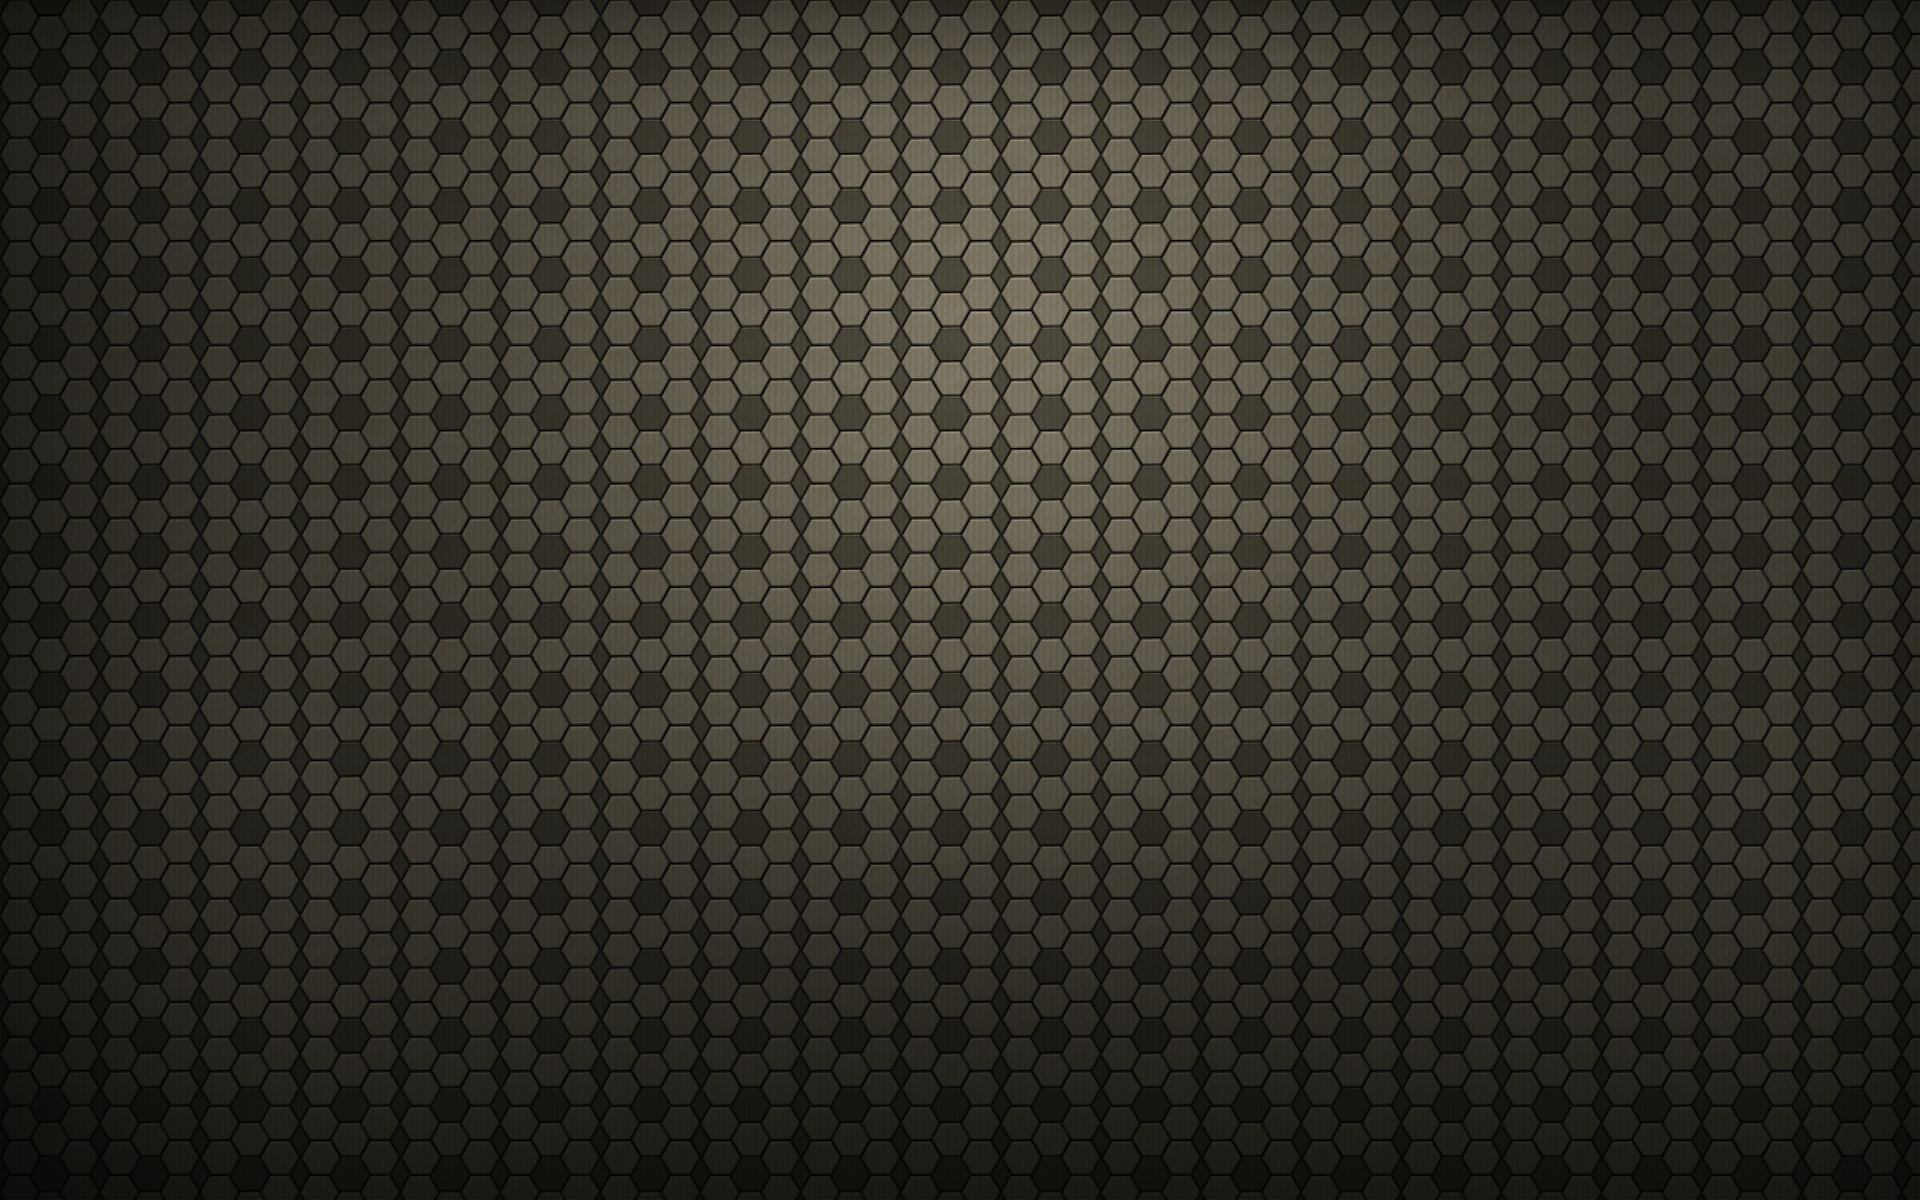 textures patterns, templates, download photo, pattern background textures, 